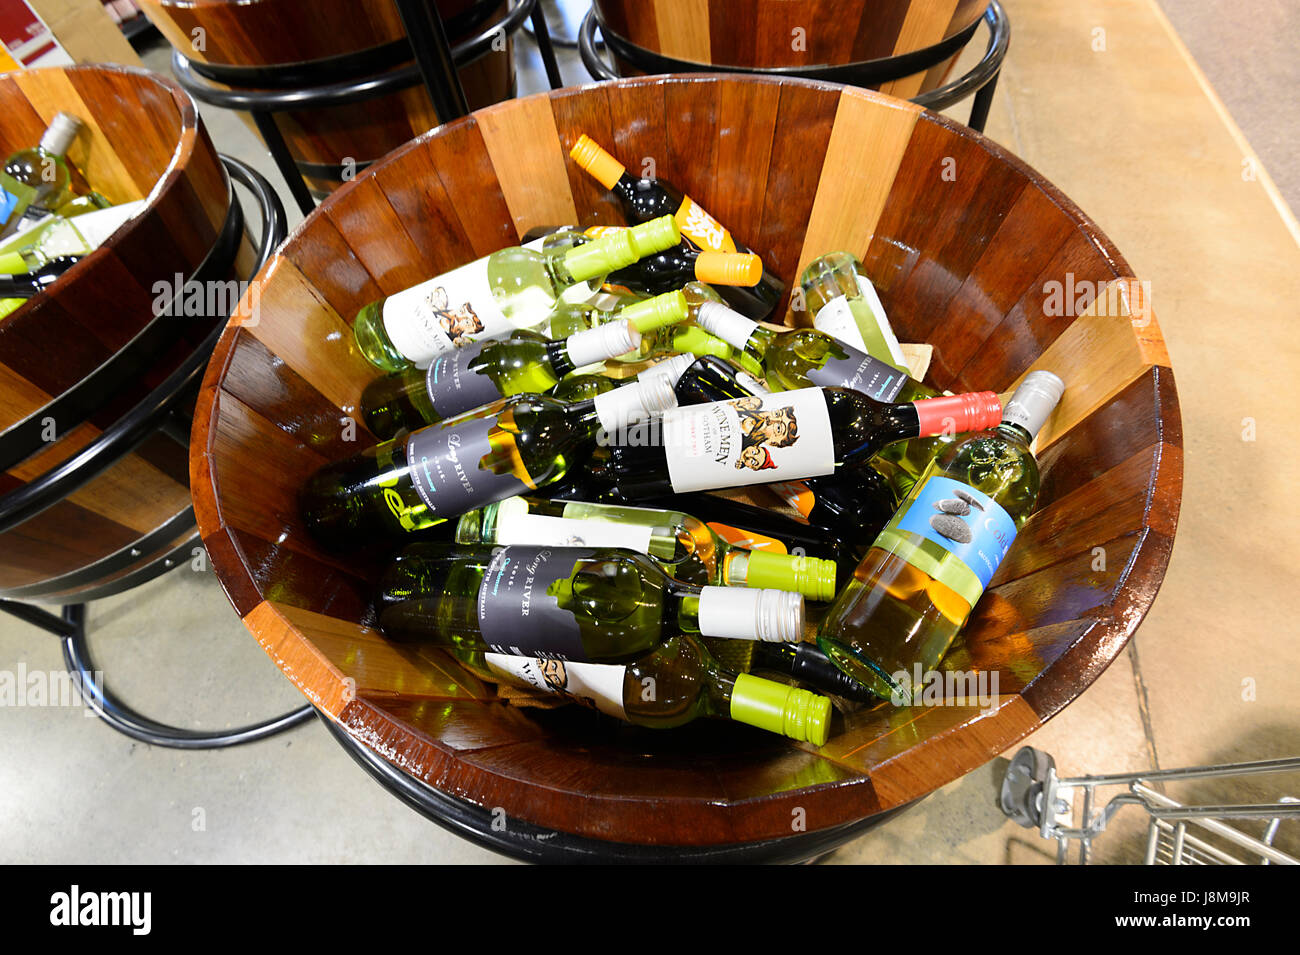 Bottles of wine on display in a half barrel at Dan Murphy's Liquor Store, Shellharbour, New South Wales, NSW, Australia Stock Photo